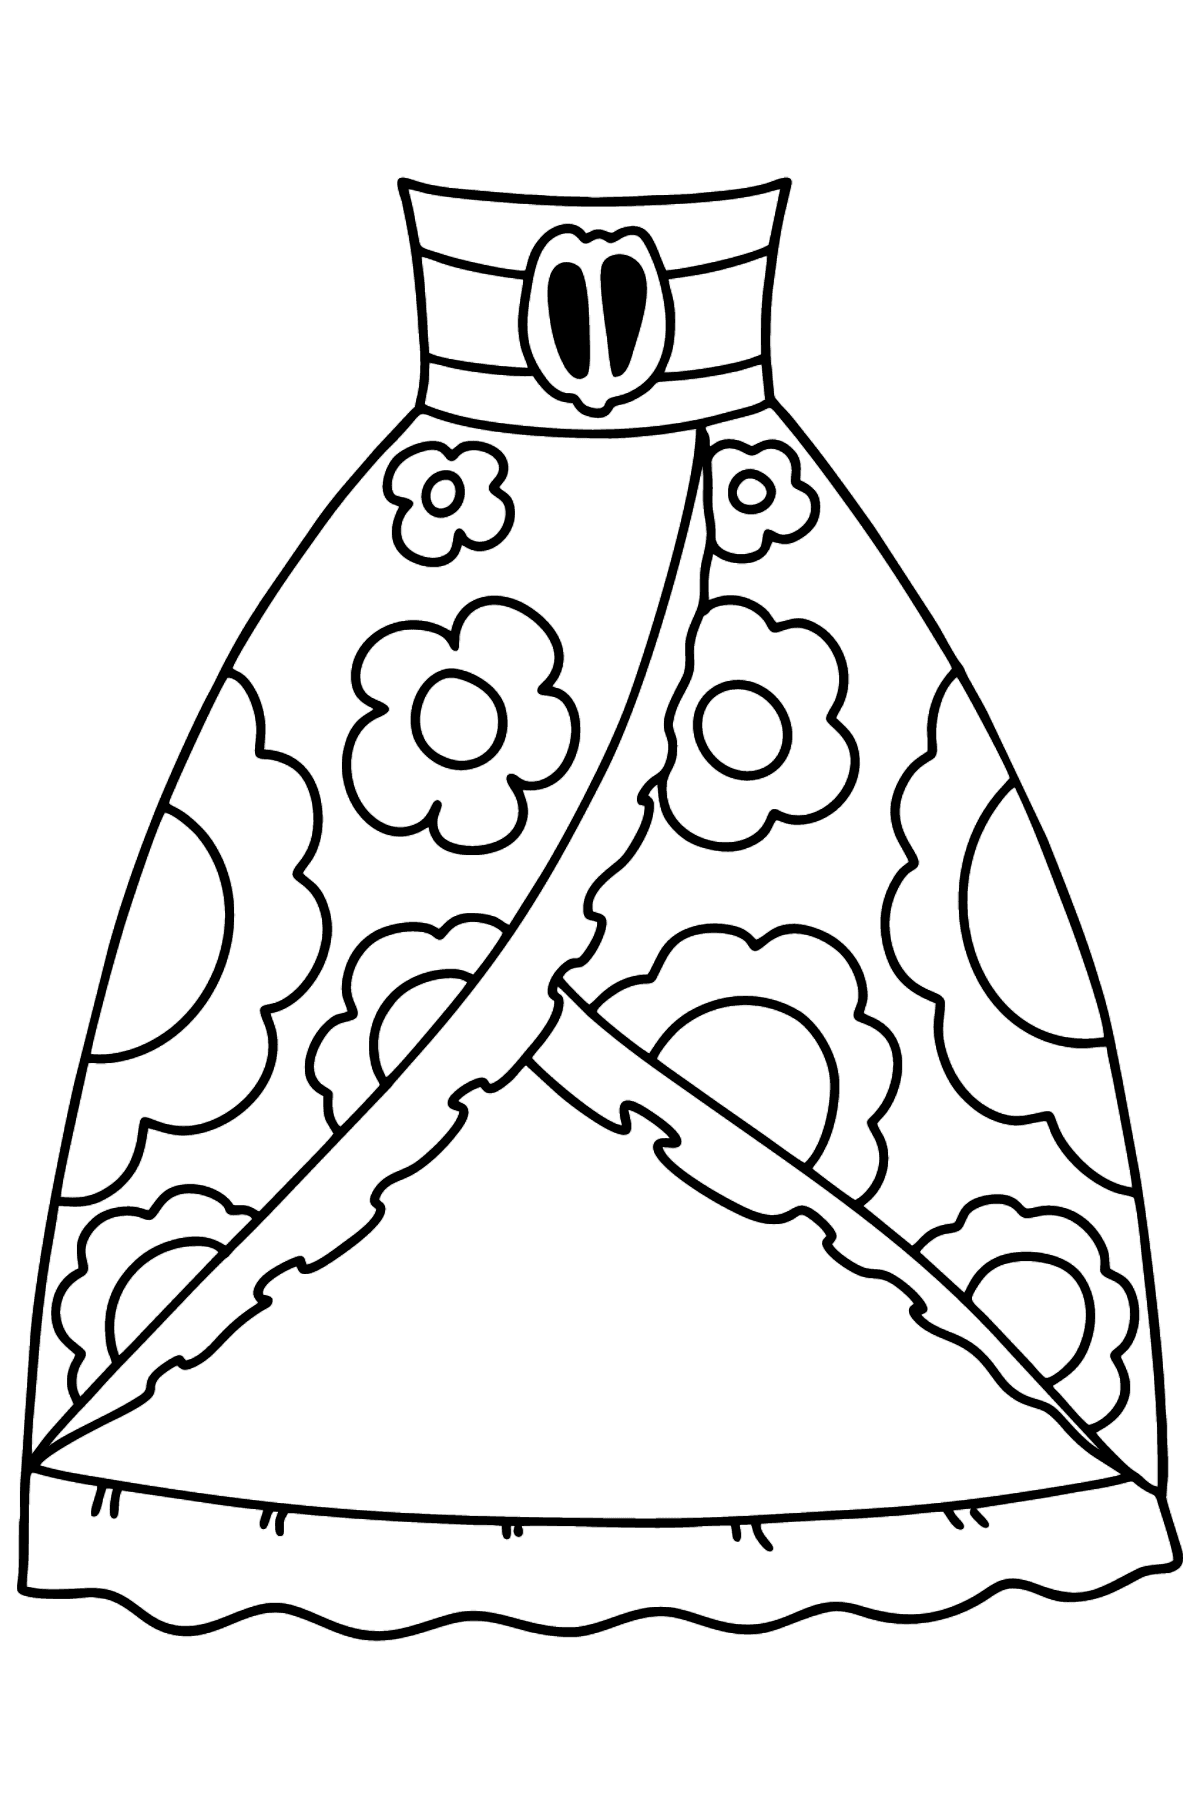 Coloring page with skirt - Coloring Pages for Kids